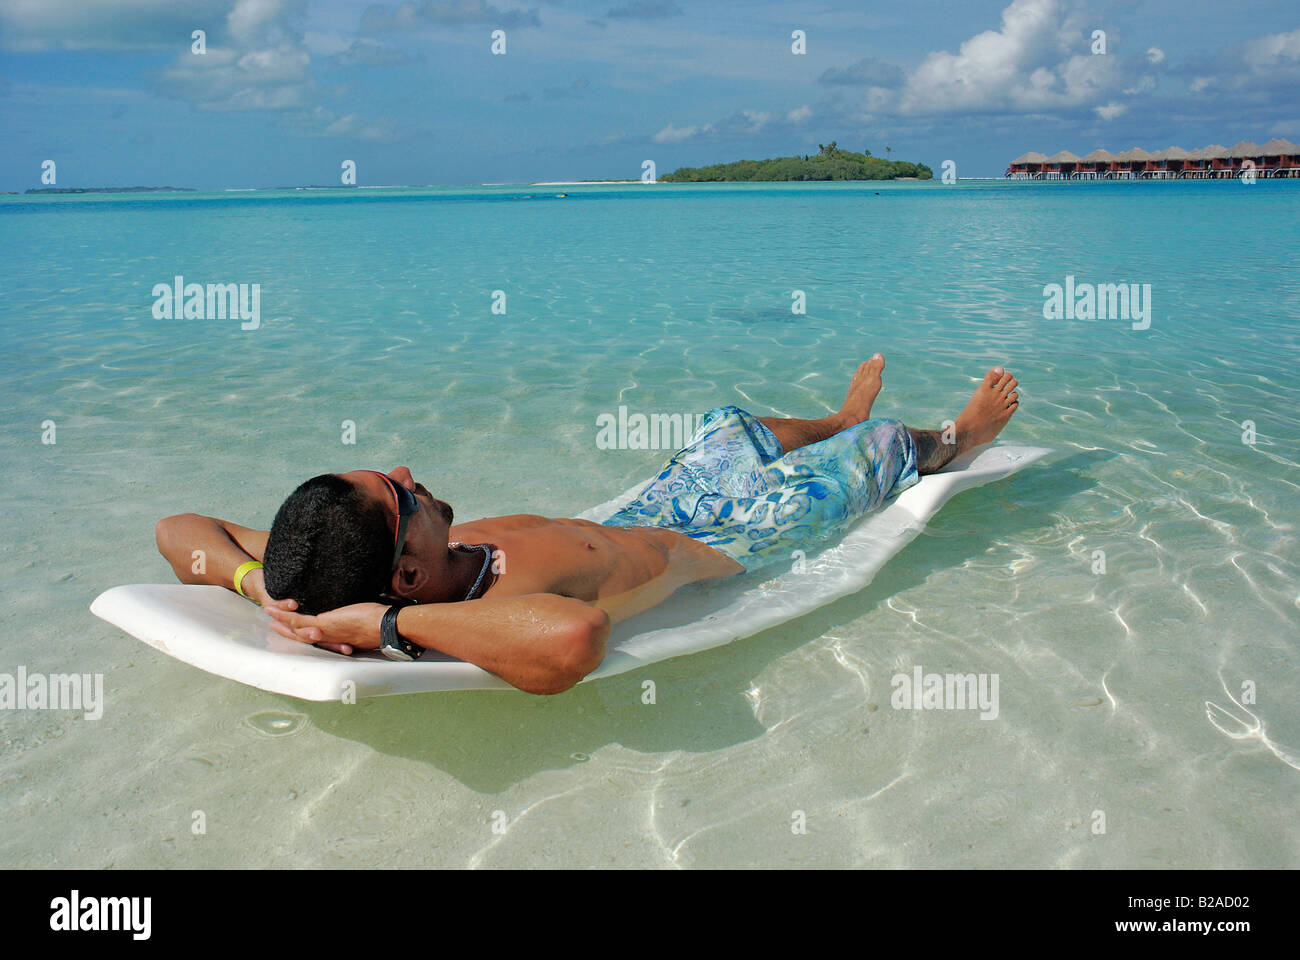 resting on vacation at paradise Maldives island resort Indian Ocean blue cristal clear sea water Stock Photo